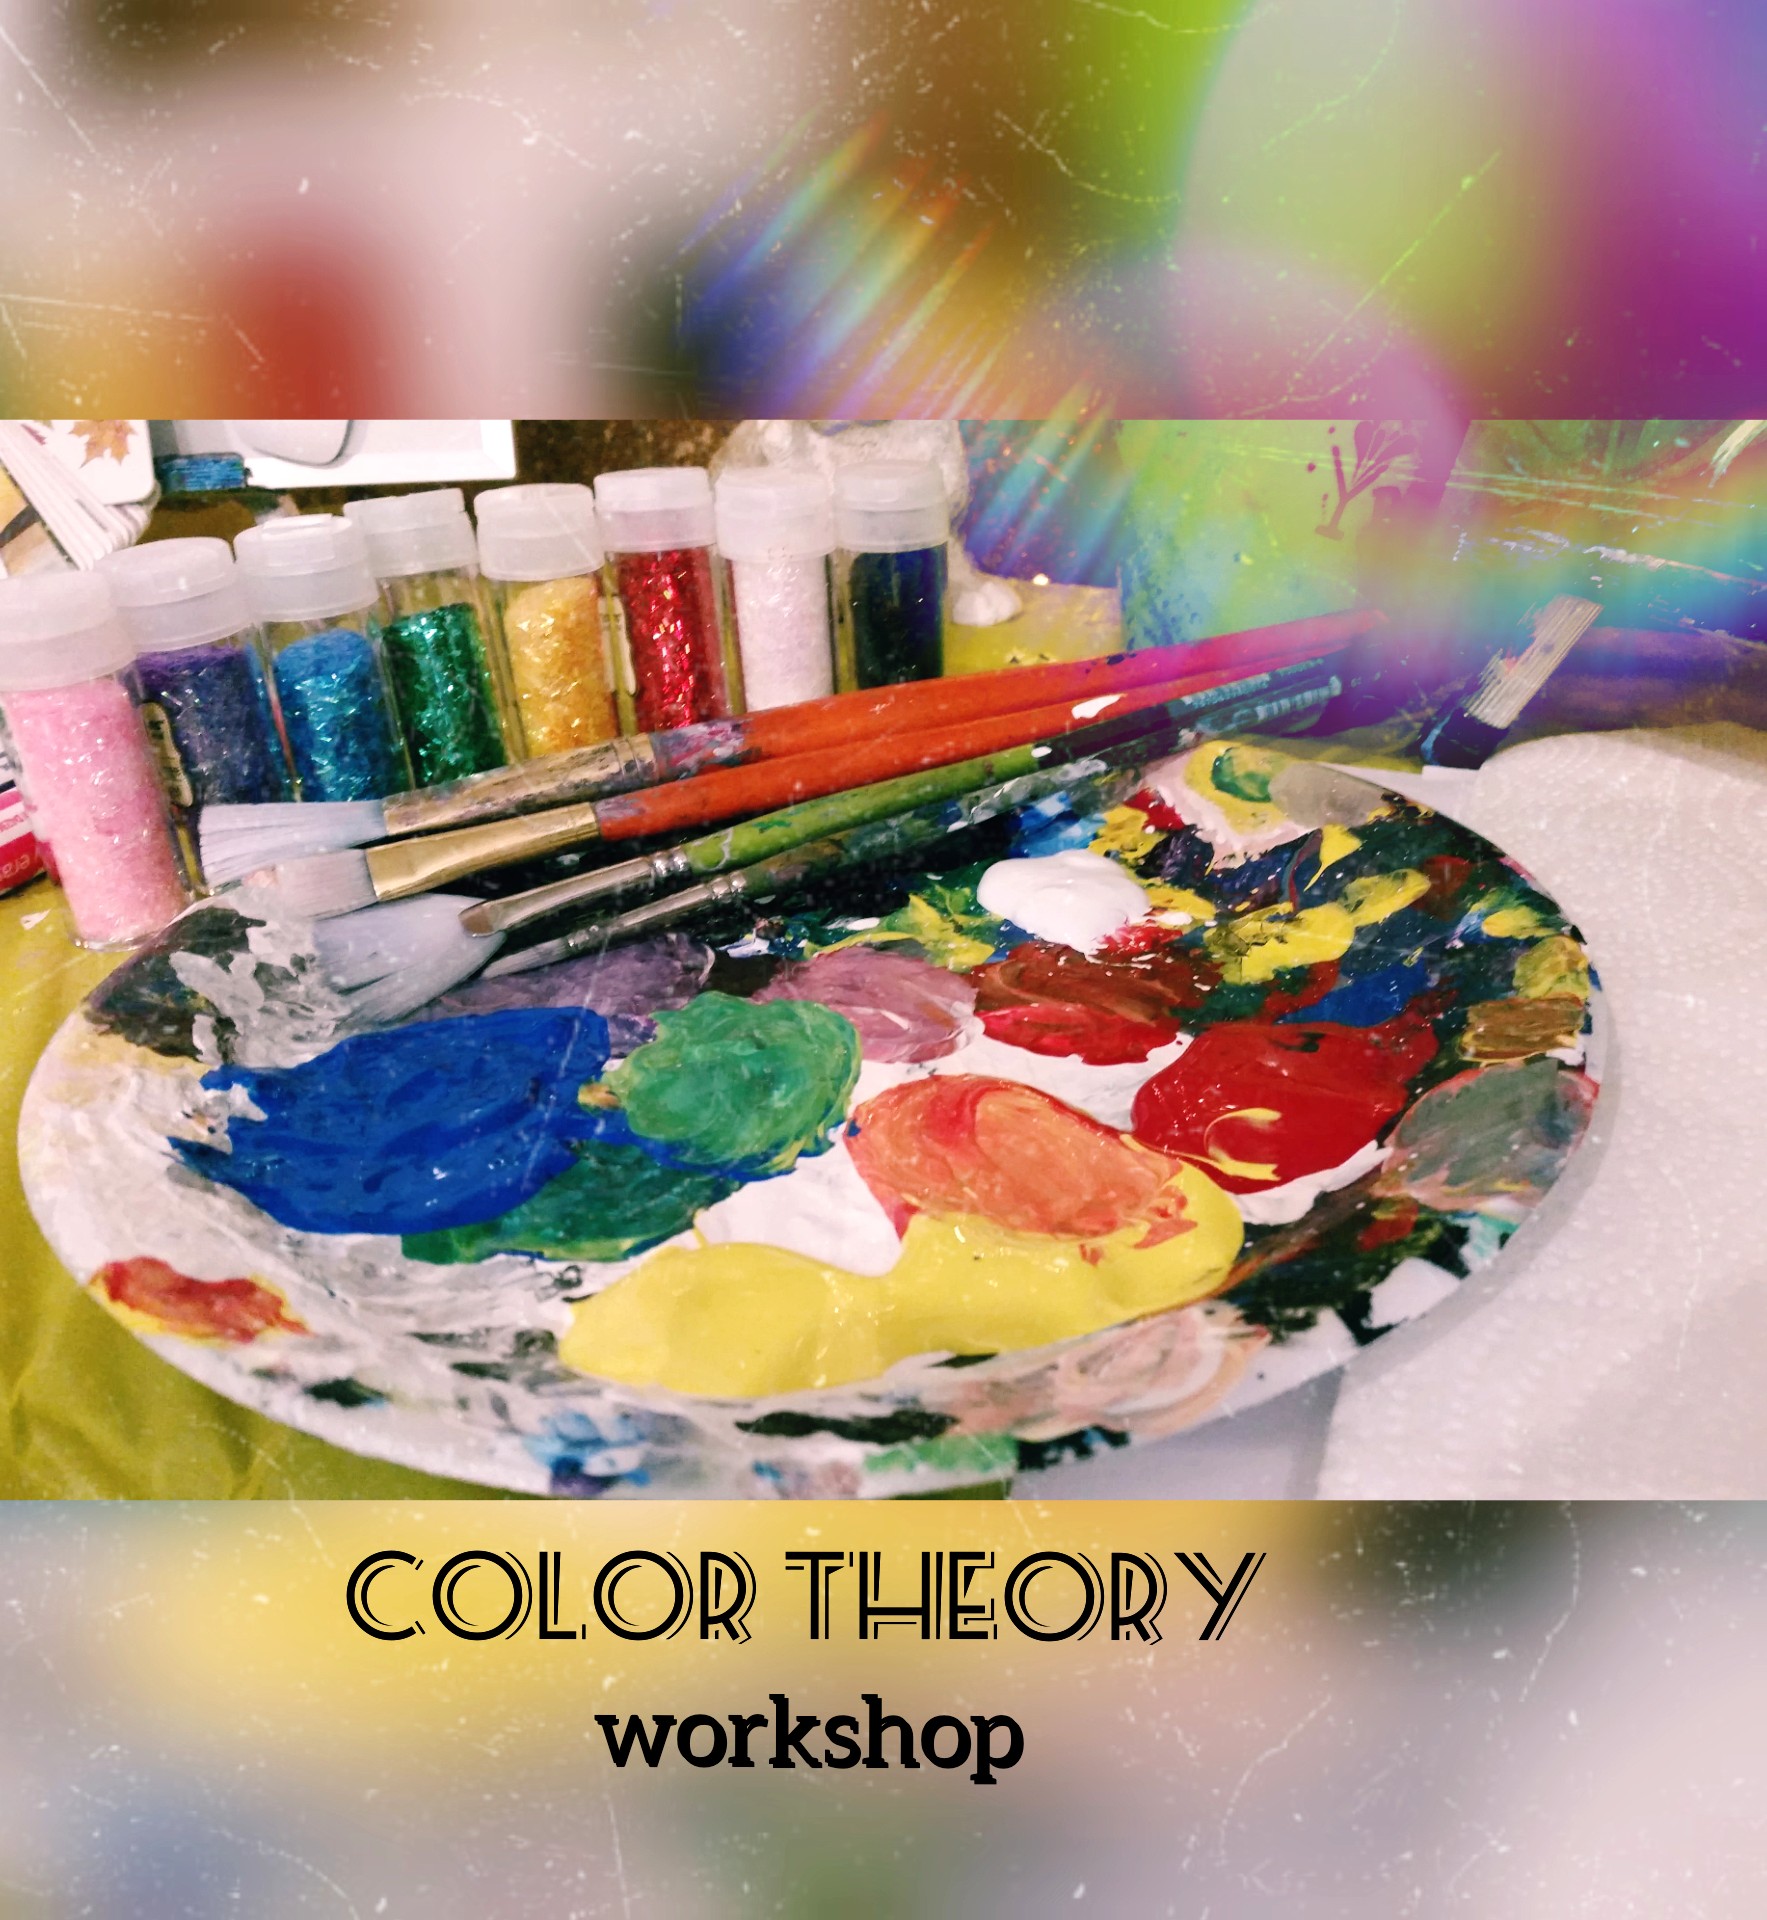 A Color Theory Workshop experience project by Yaymaker